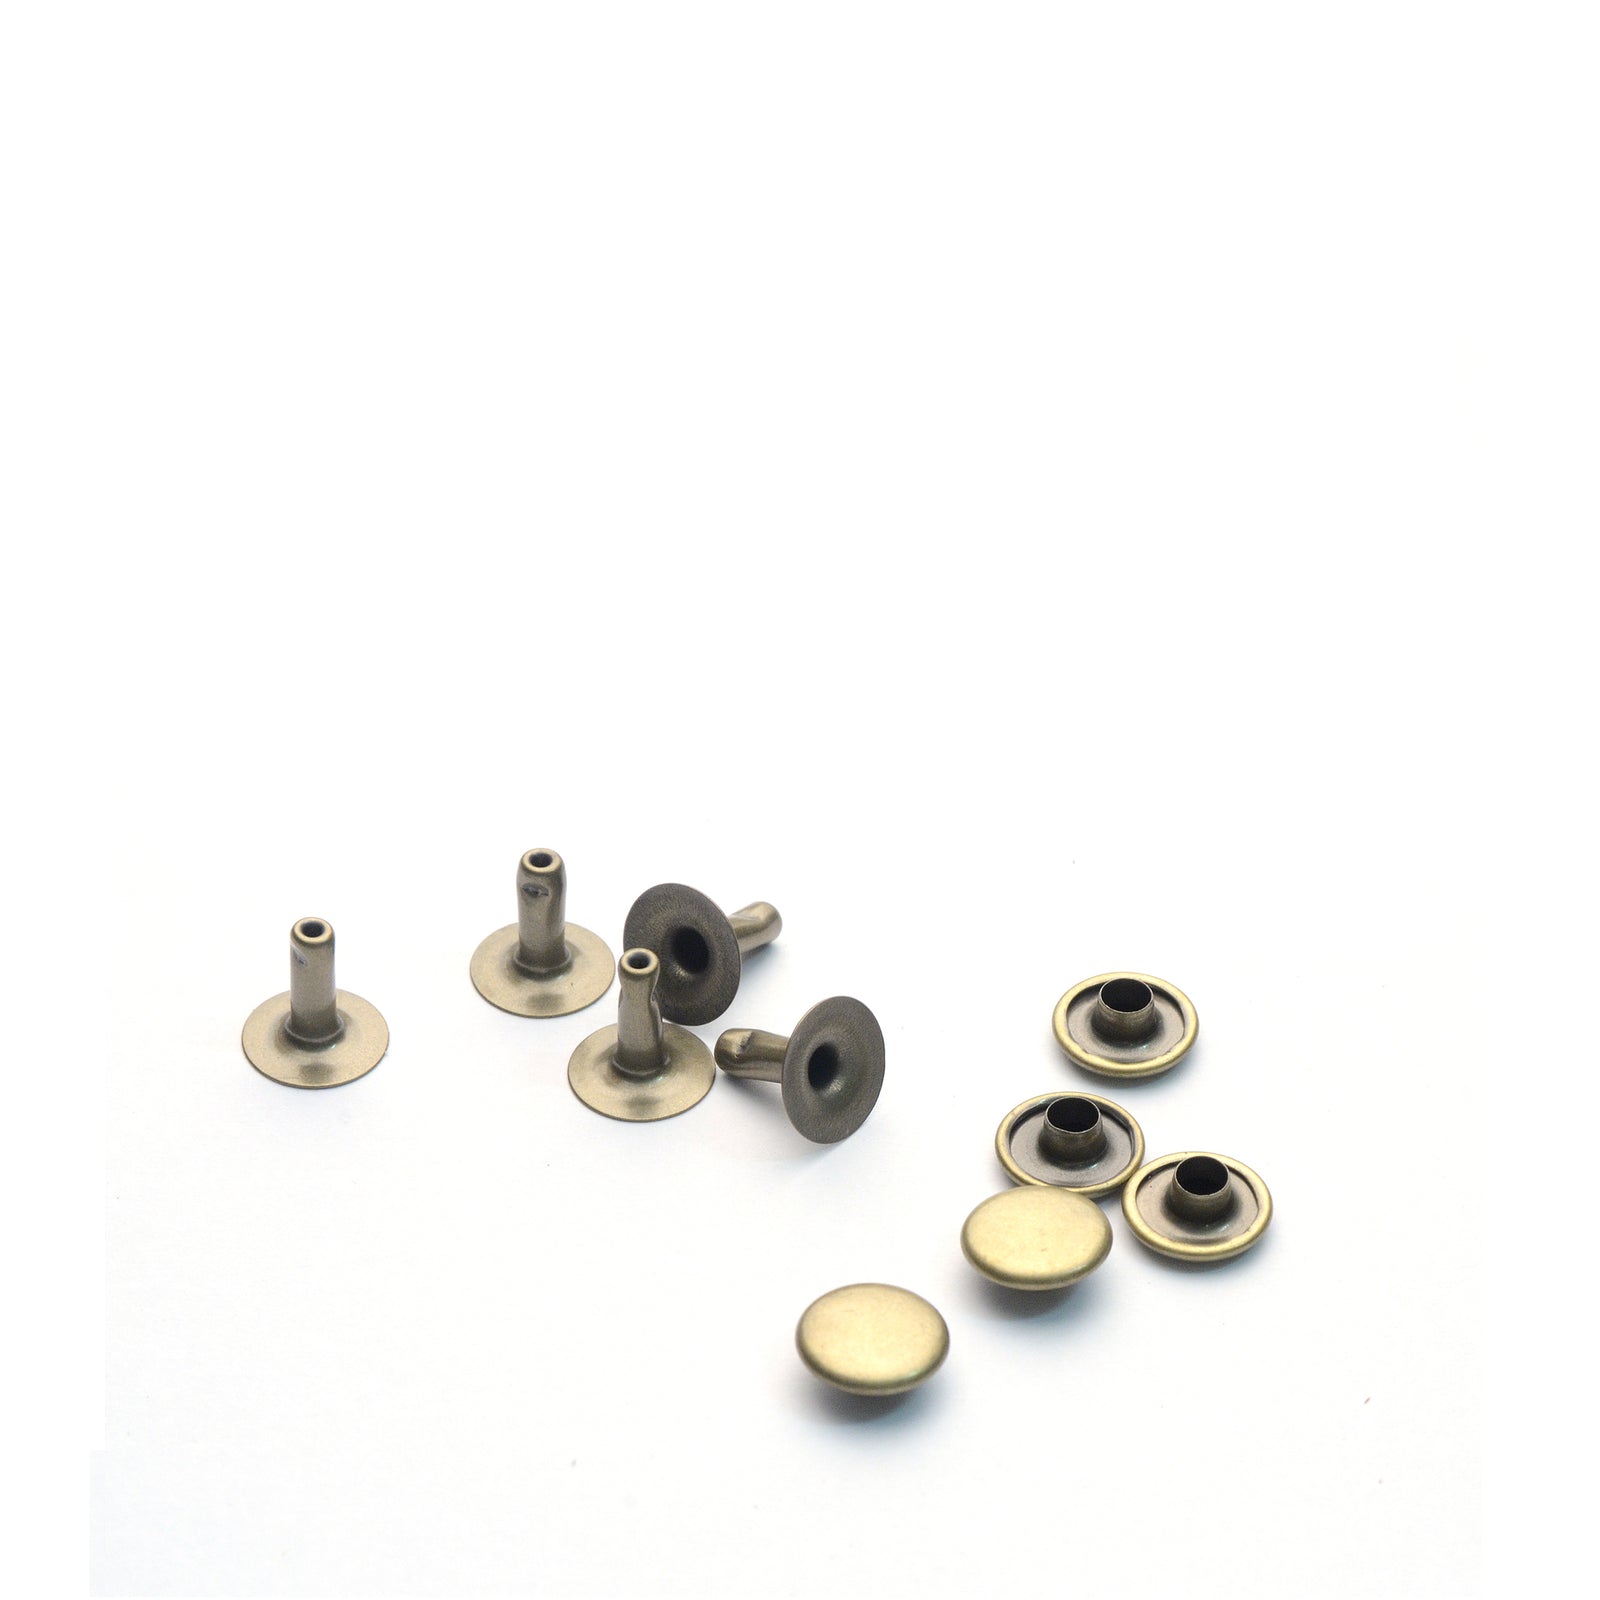 Small Single Cap Rivets Brass Plated pkg of 100 - Leathersmith